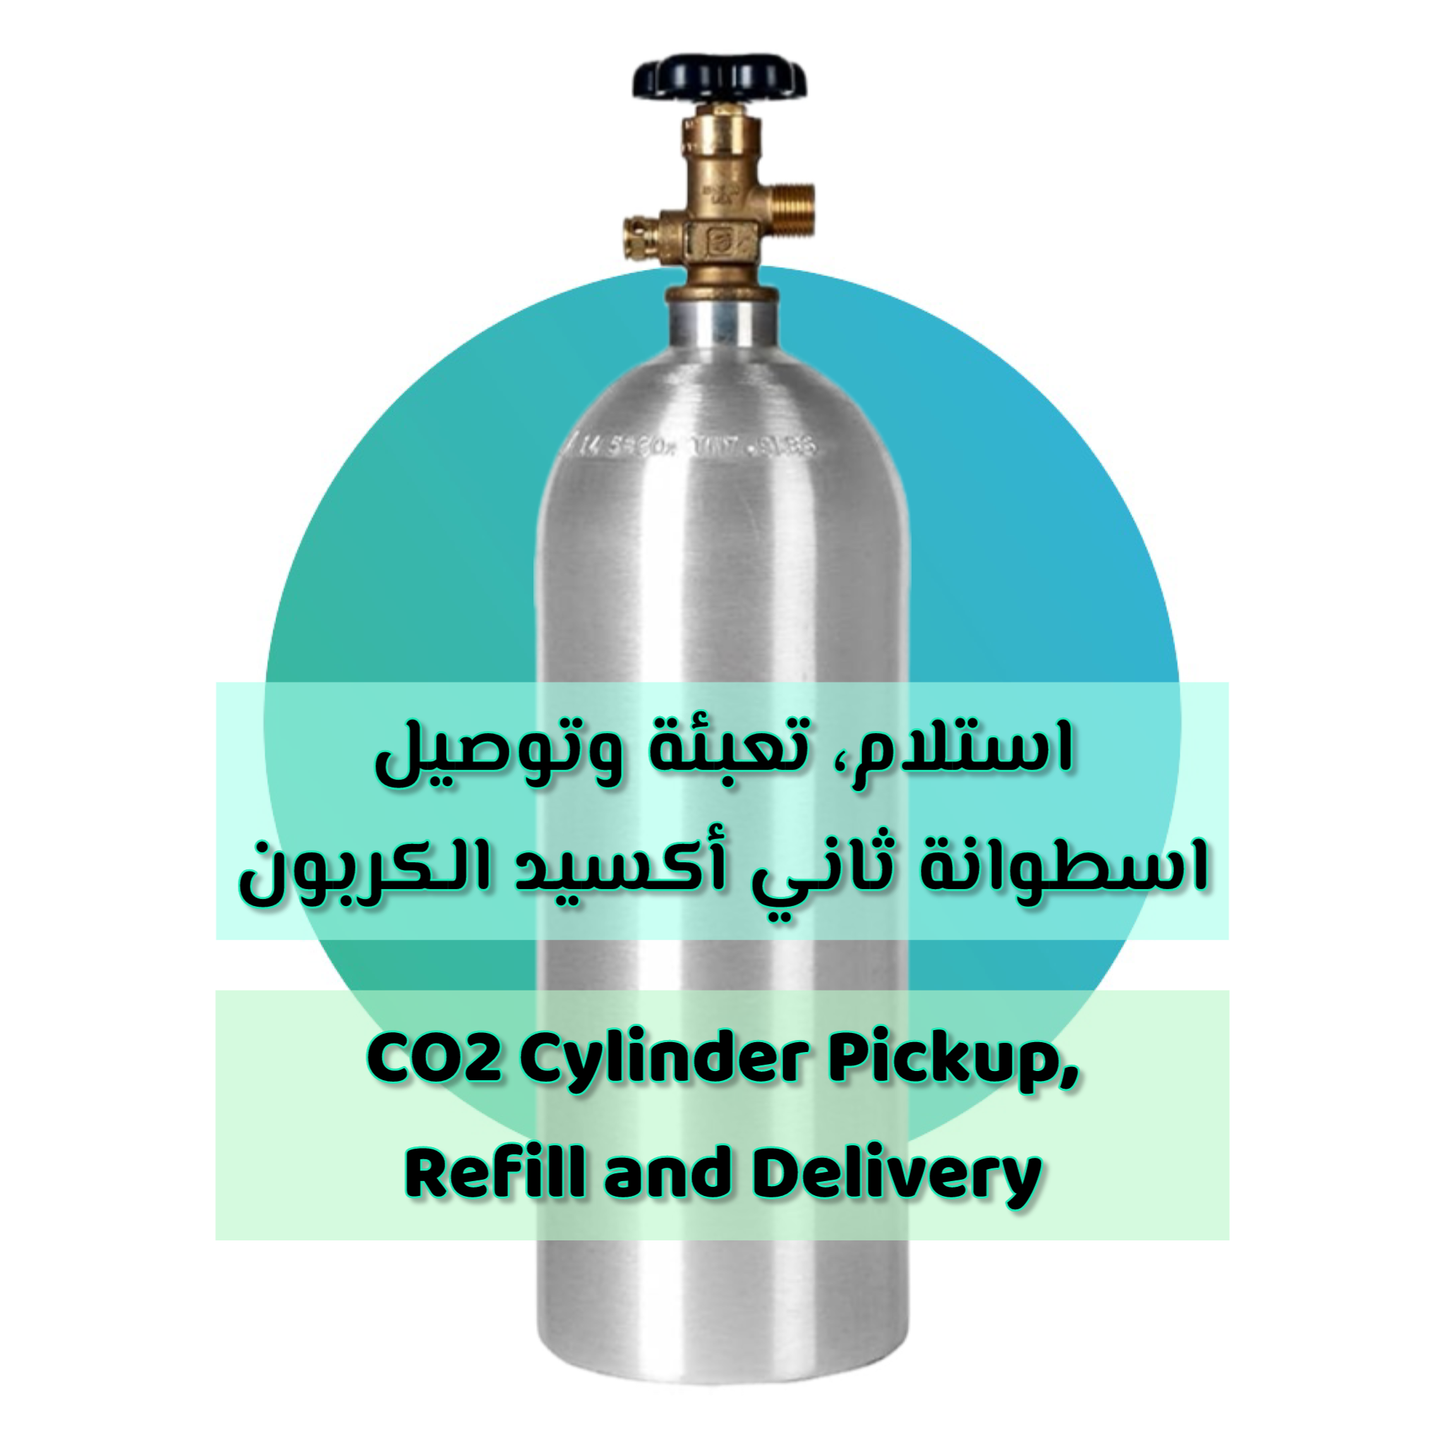 Service: CO2 Cylinder Refill with Pickup and Delivery (Dubai ONLY)